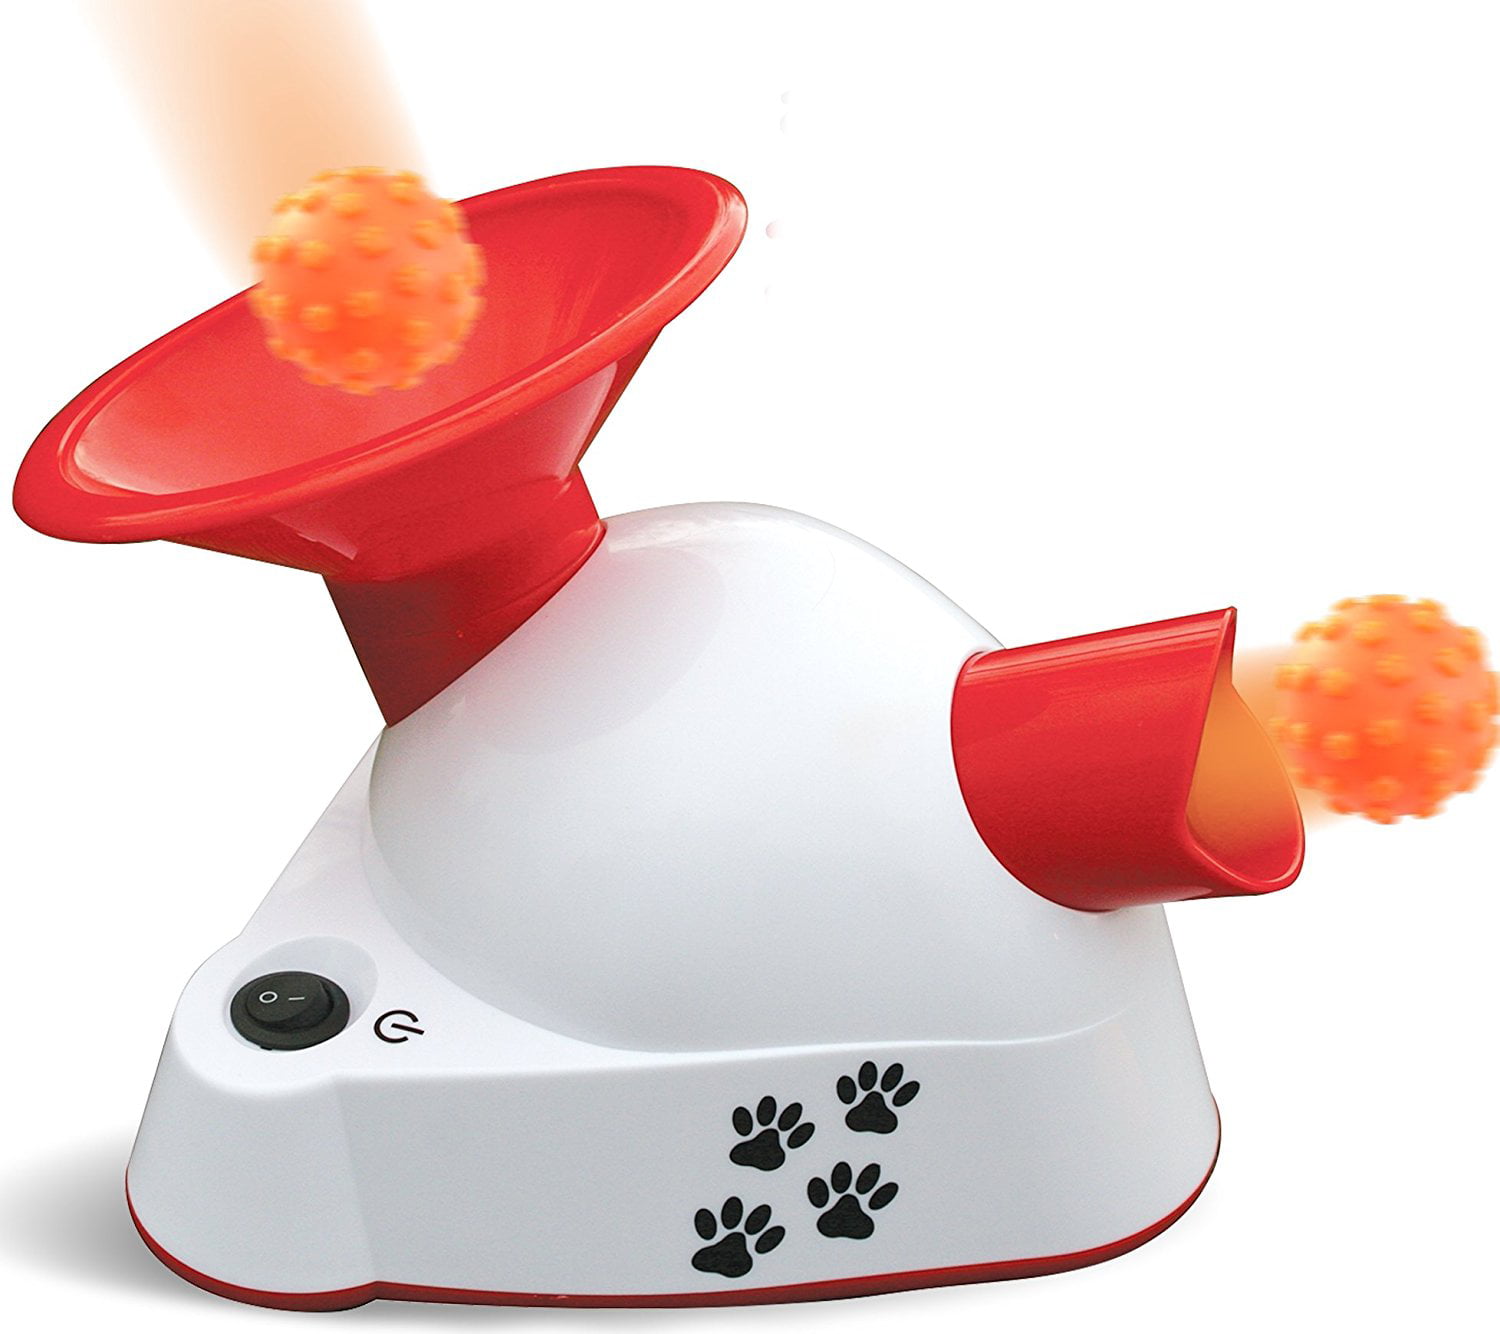 automatic ball thrower for small dogs